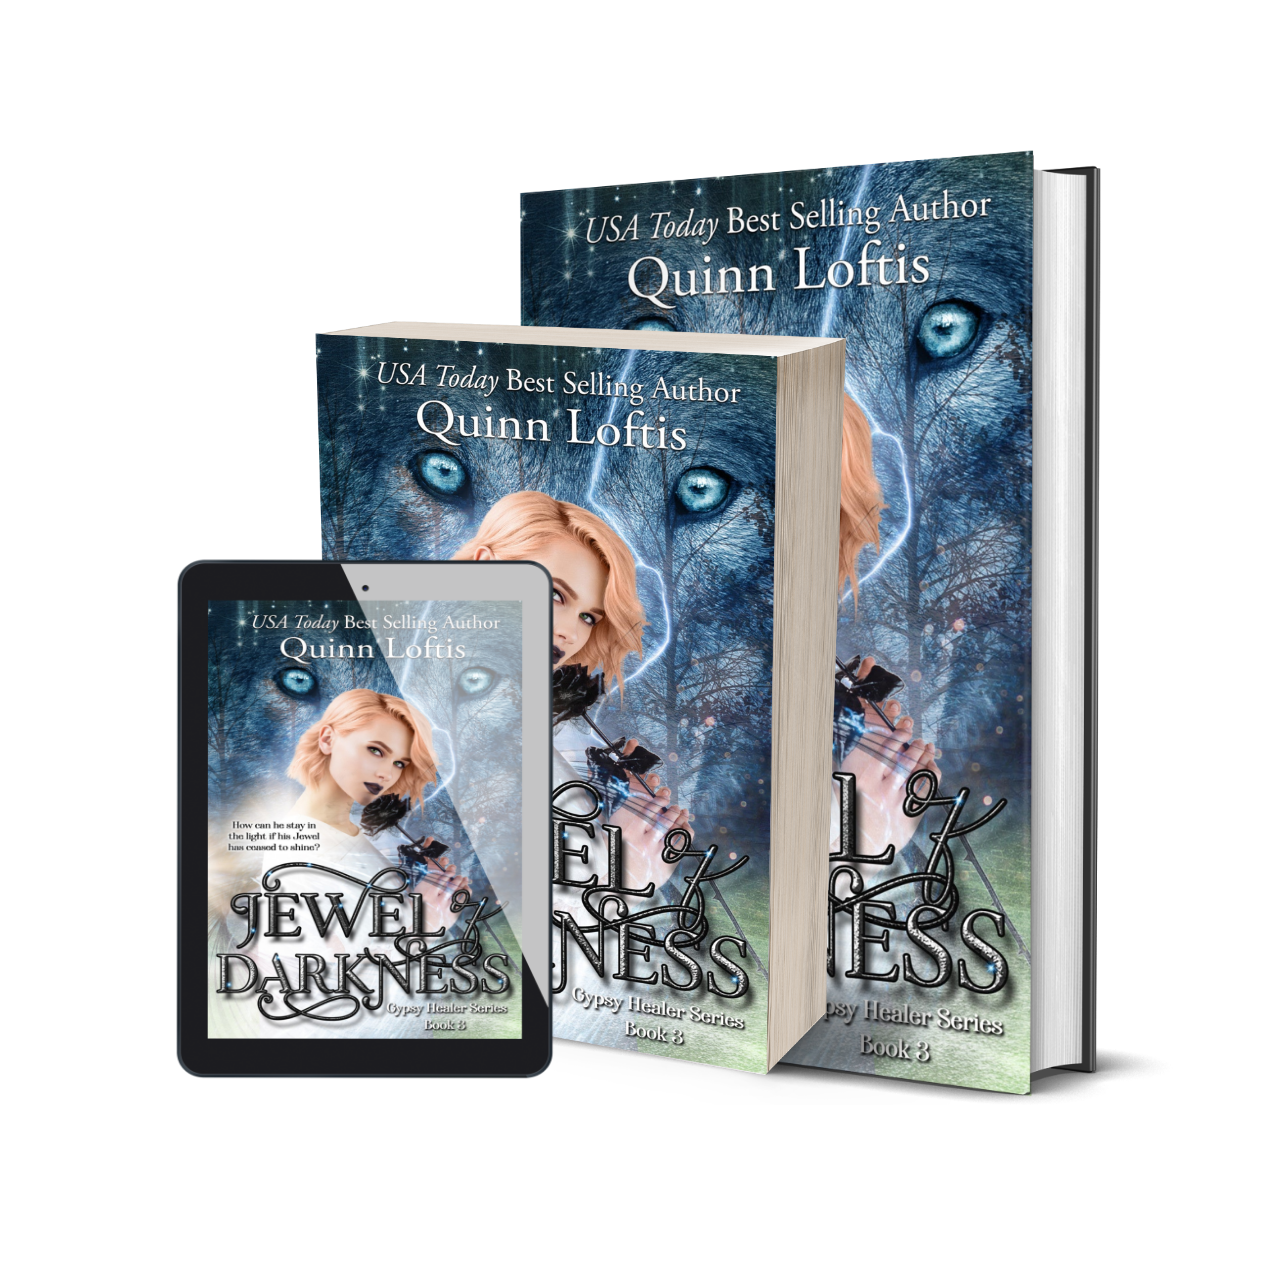 Jewel of Darkness (Book 3 of the Gypsy Healer Series)